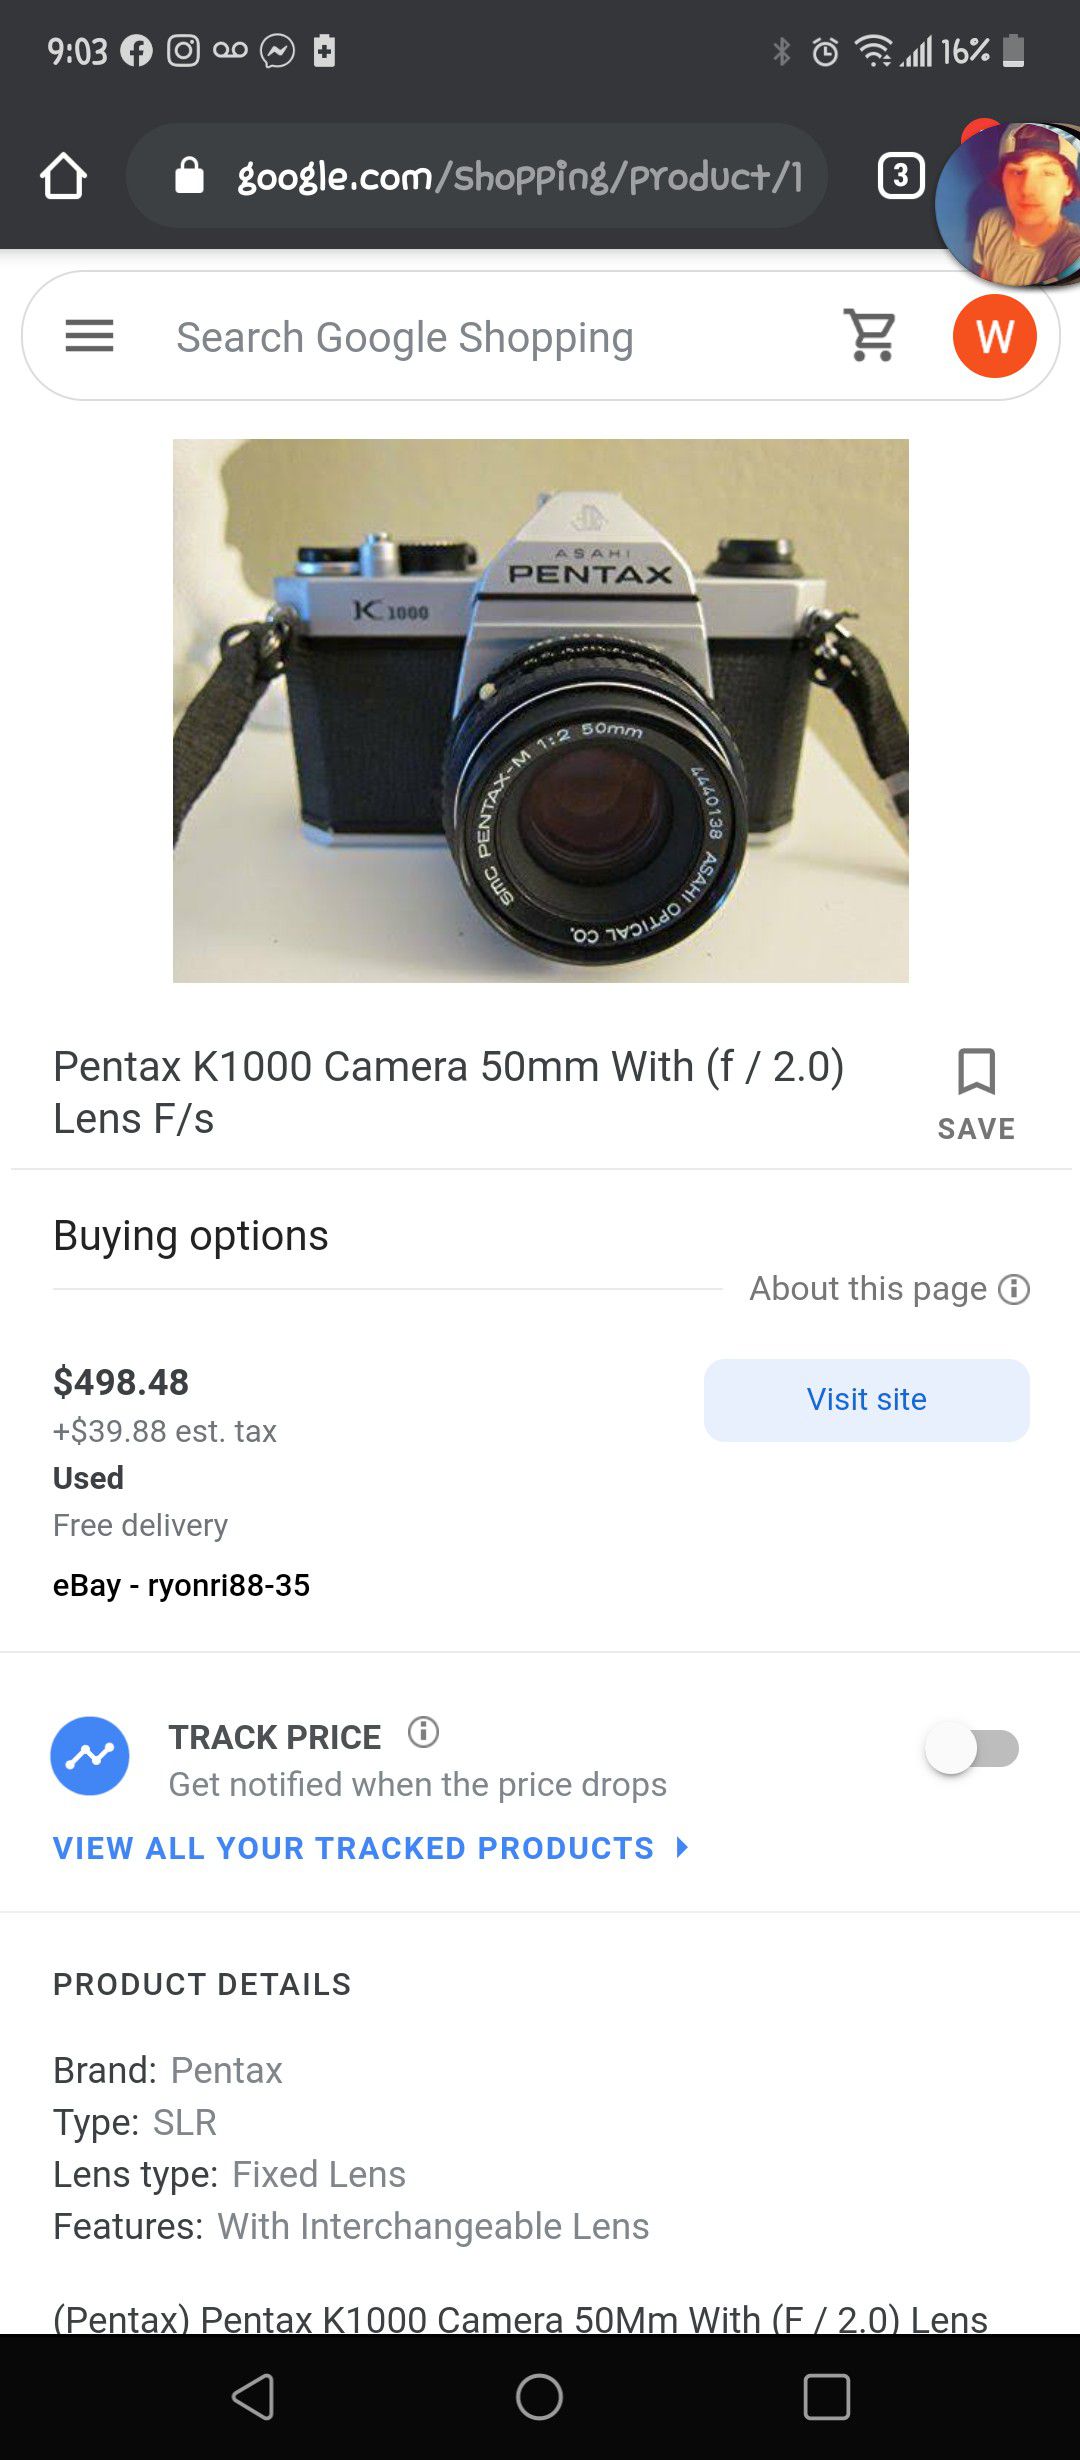 Asahi Pentax K1000 and a Time camera alot of attachments FYI the picture with price is only the camera with one lens I have 3 lens and the flash